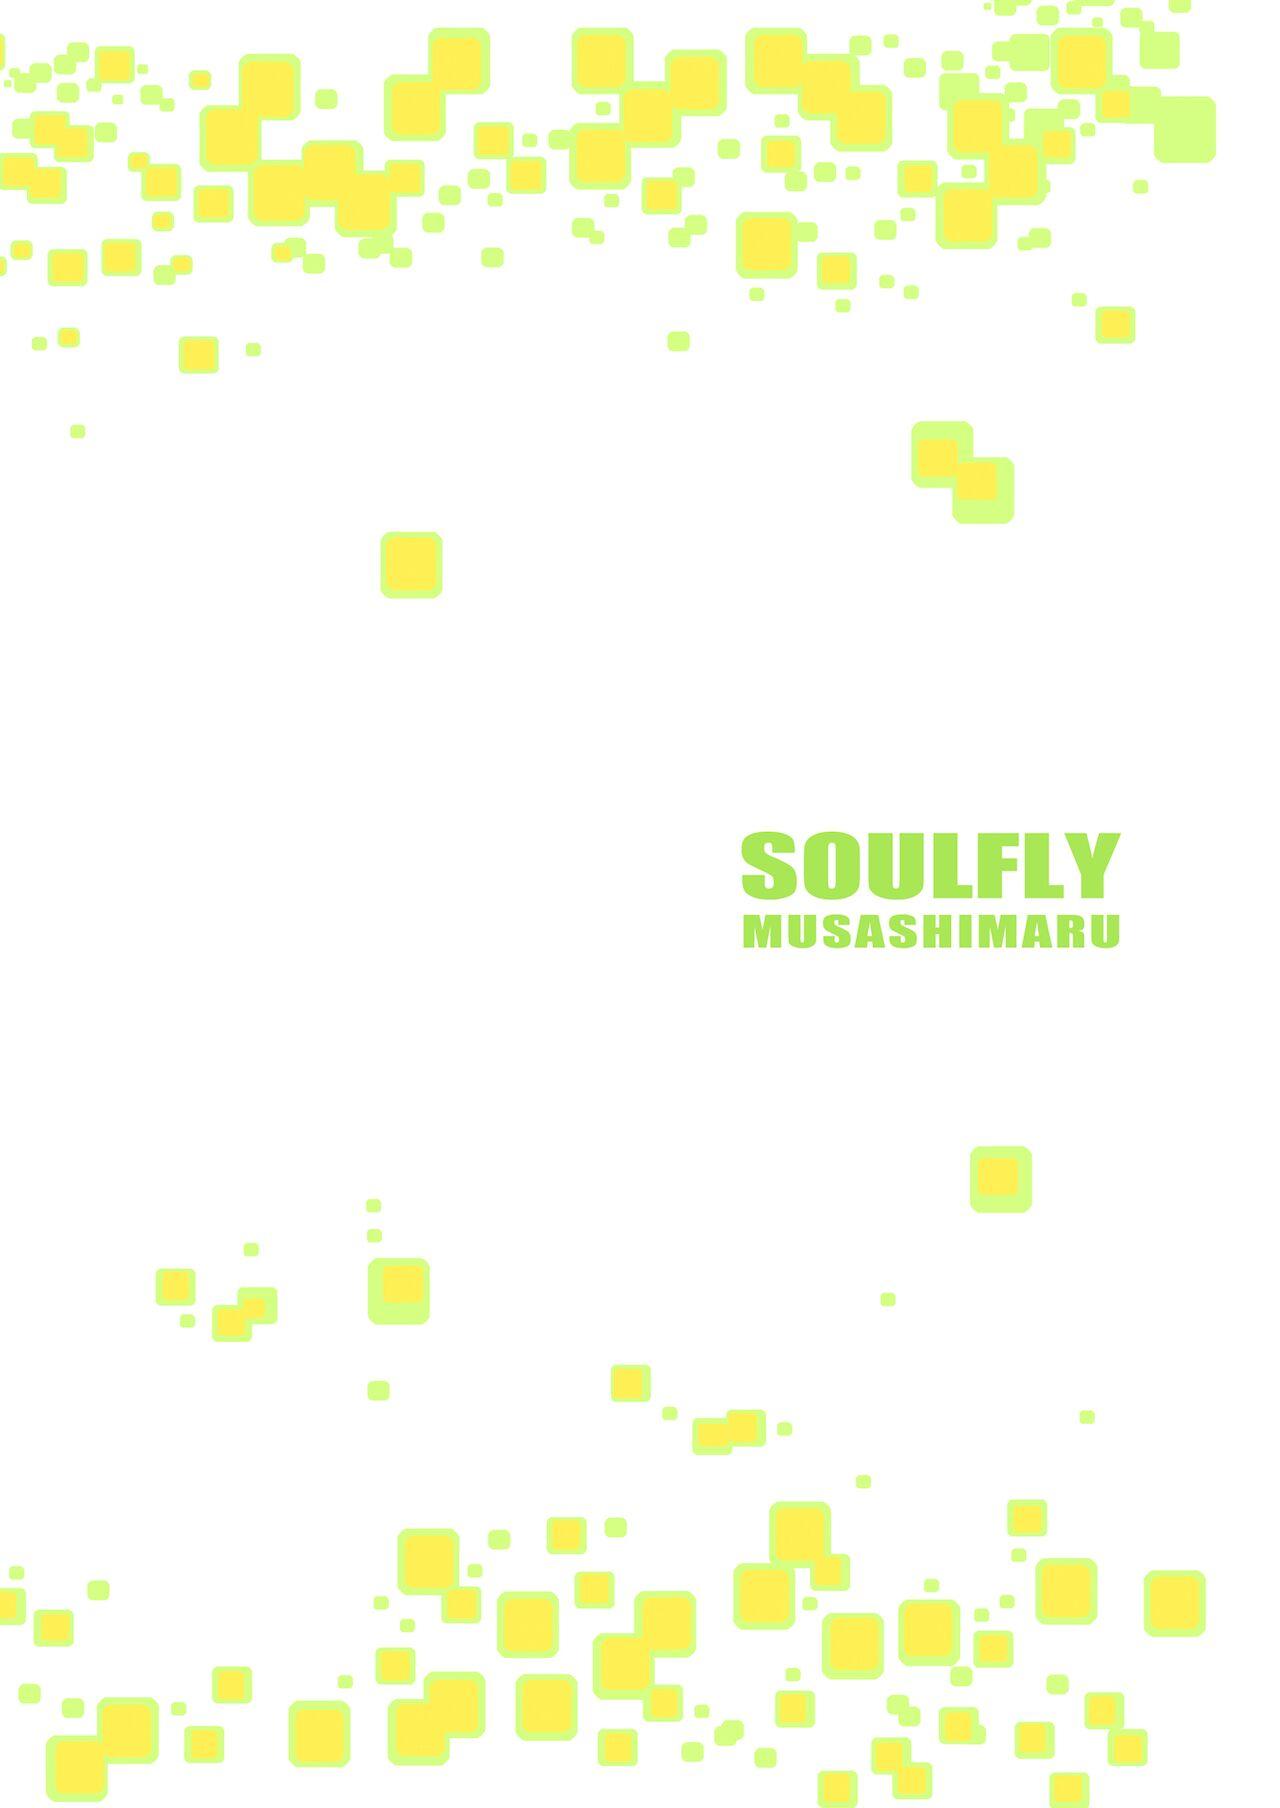 SOULFLY 7 22